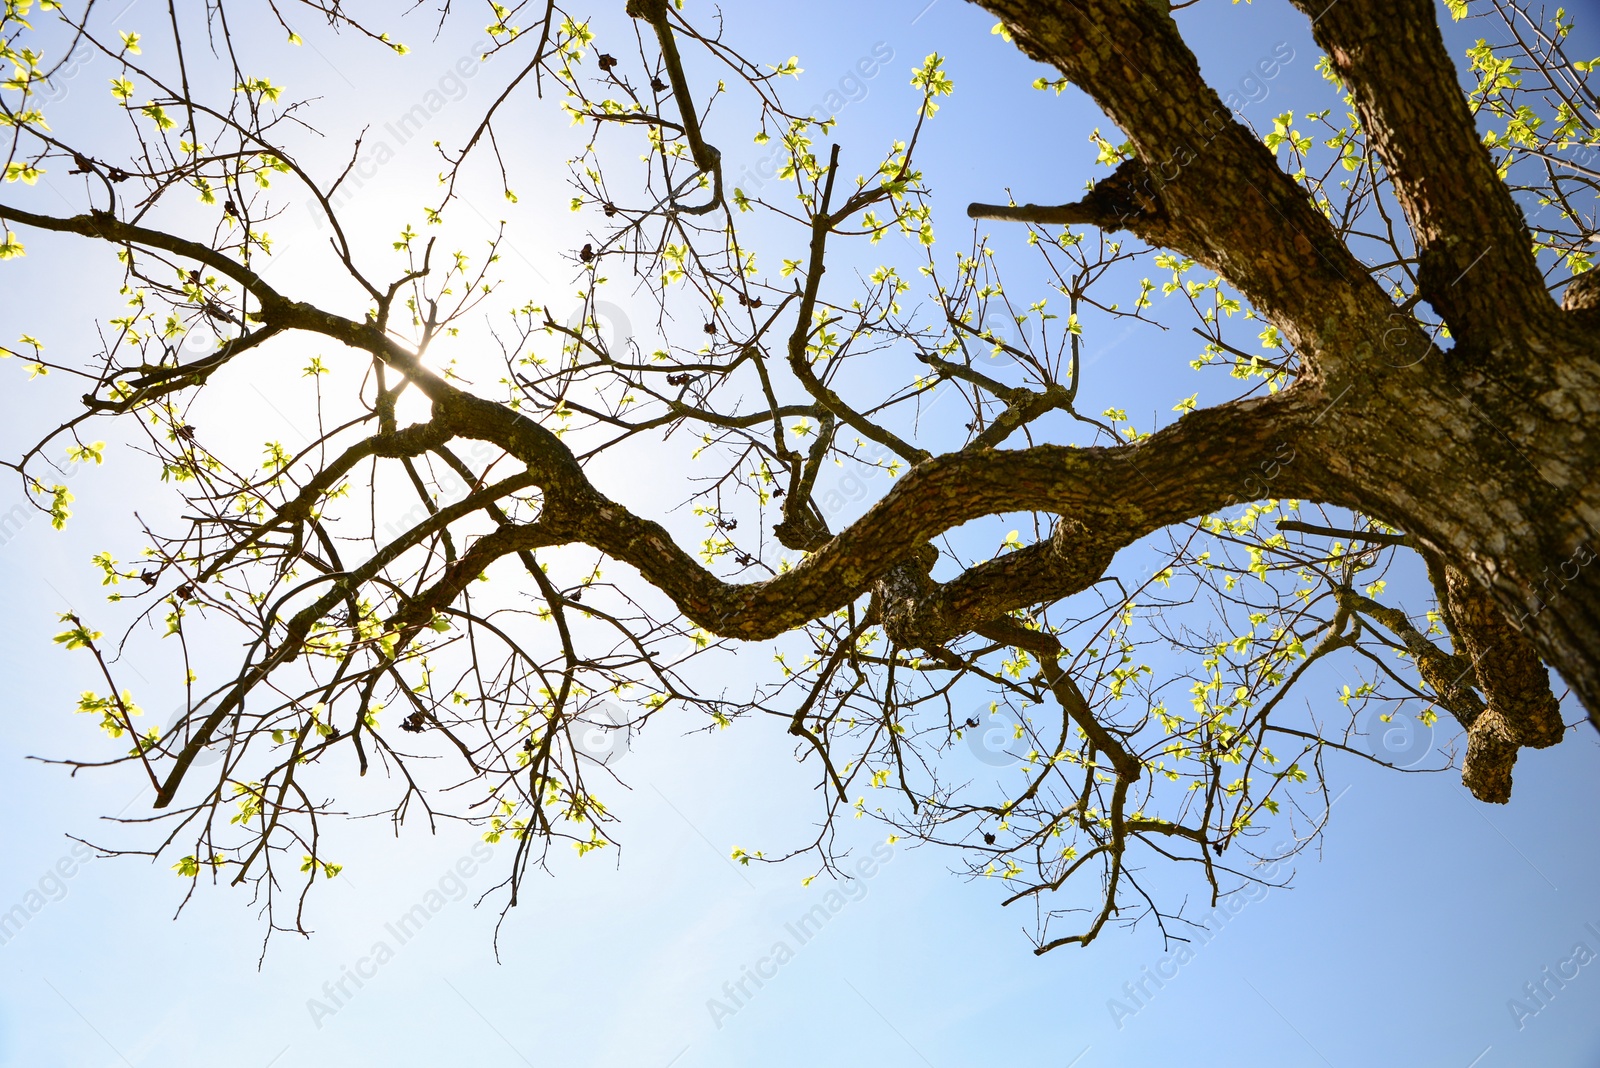 Photo of Beautiful tree with budding leaves against blue sky on sunny day, low angle view